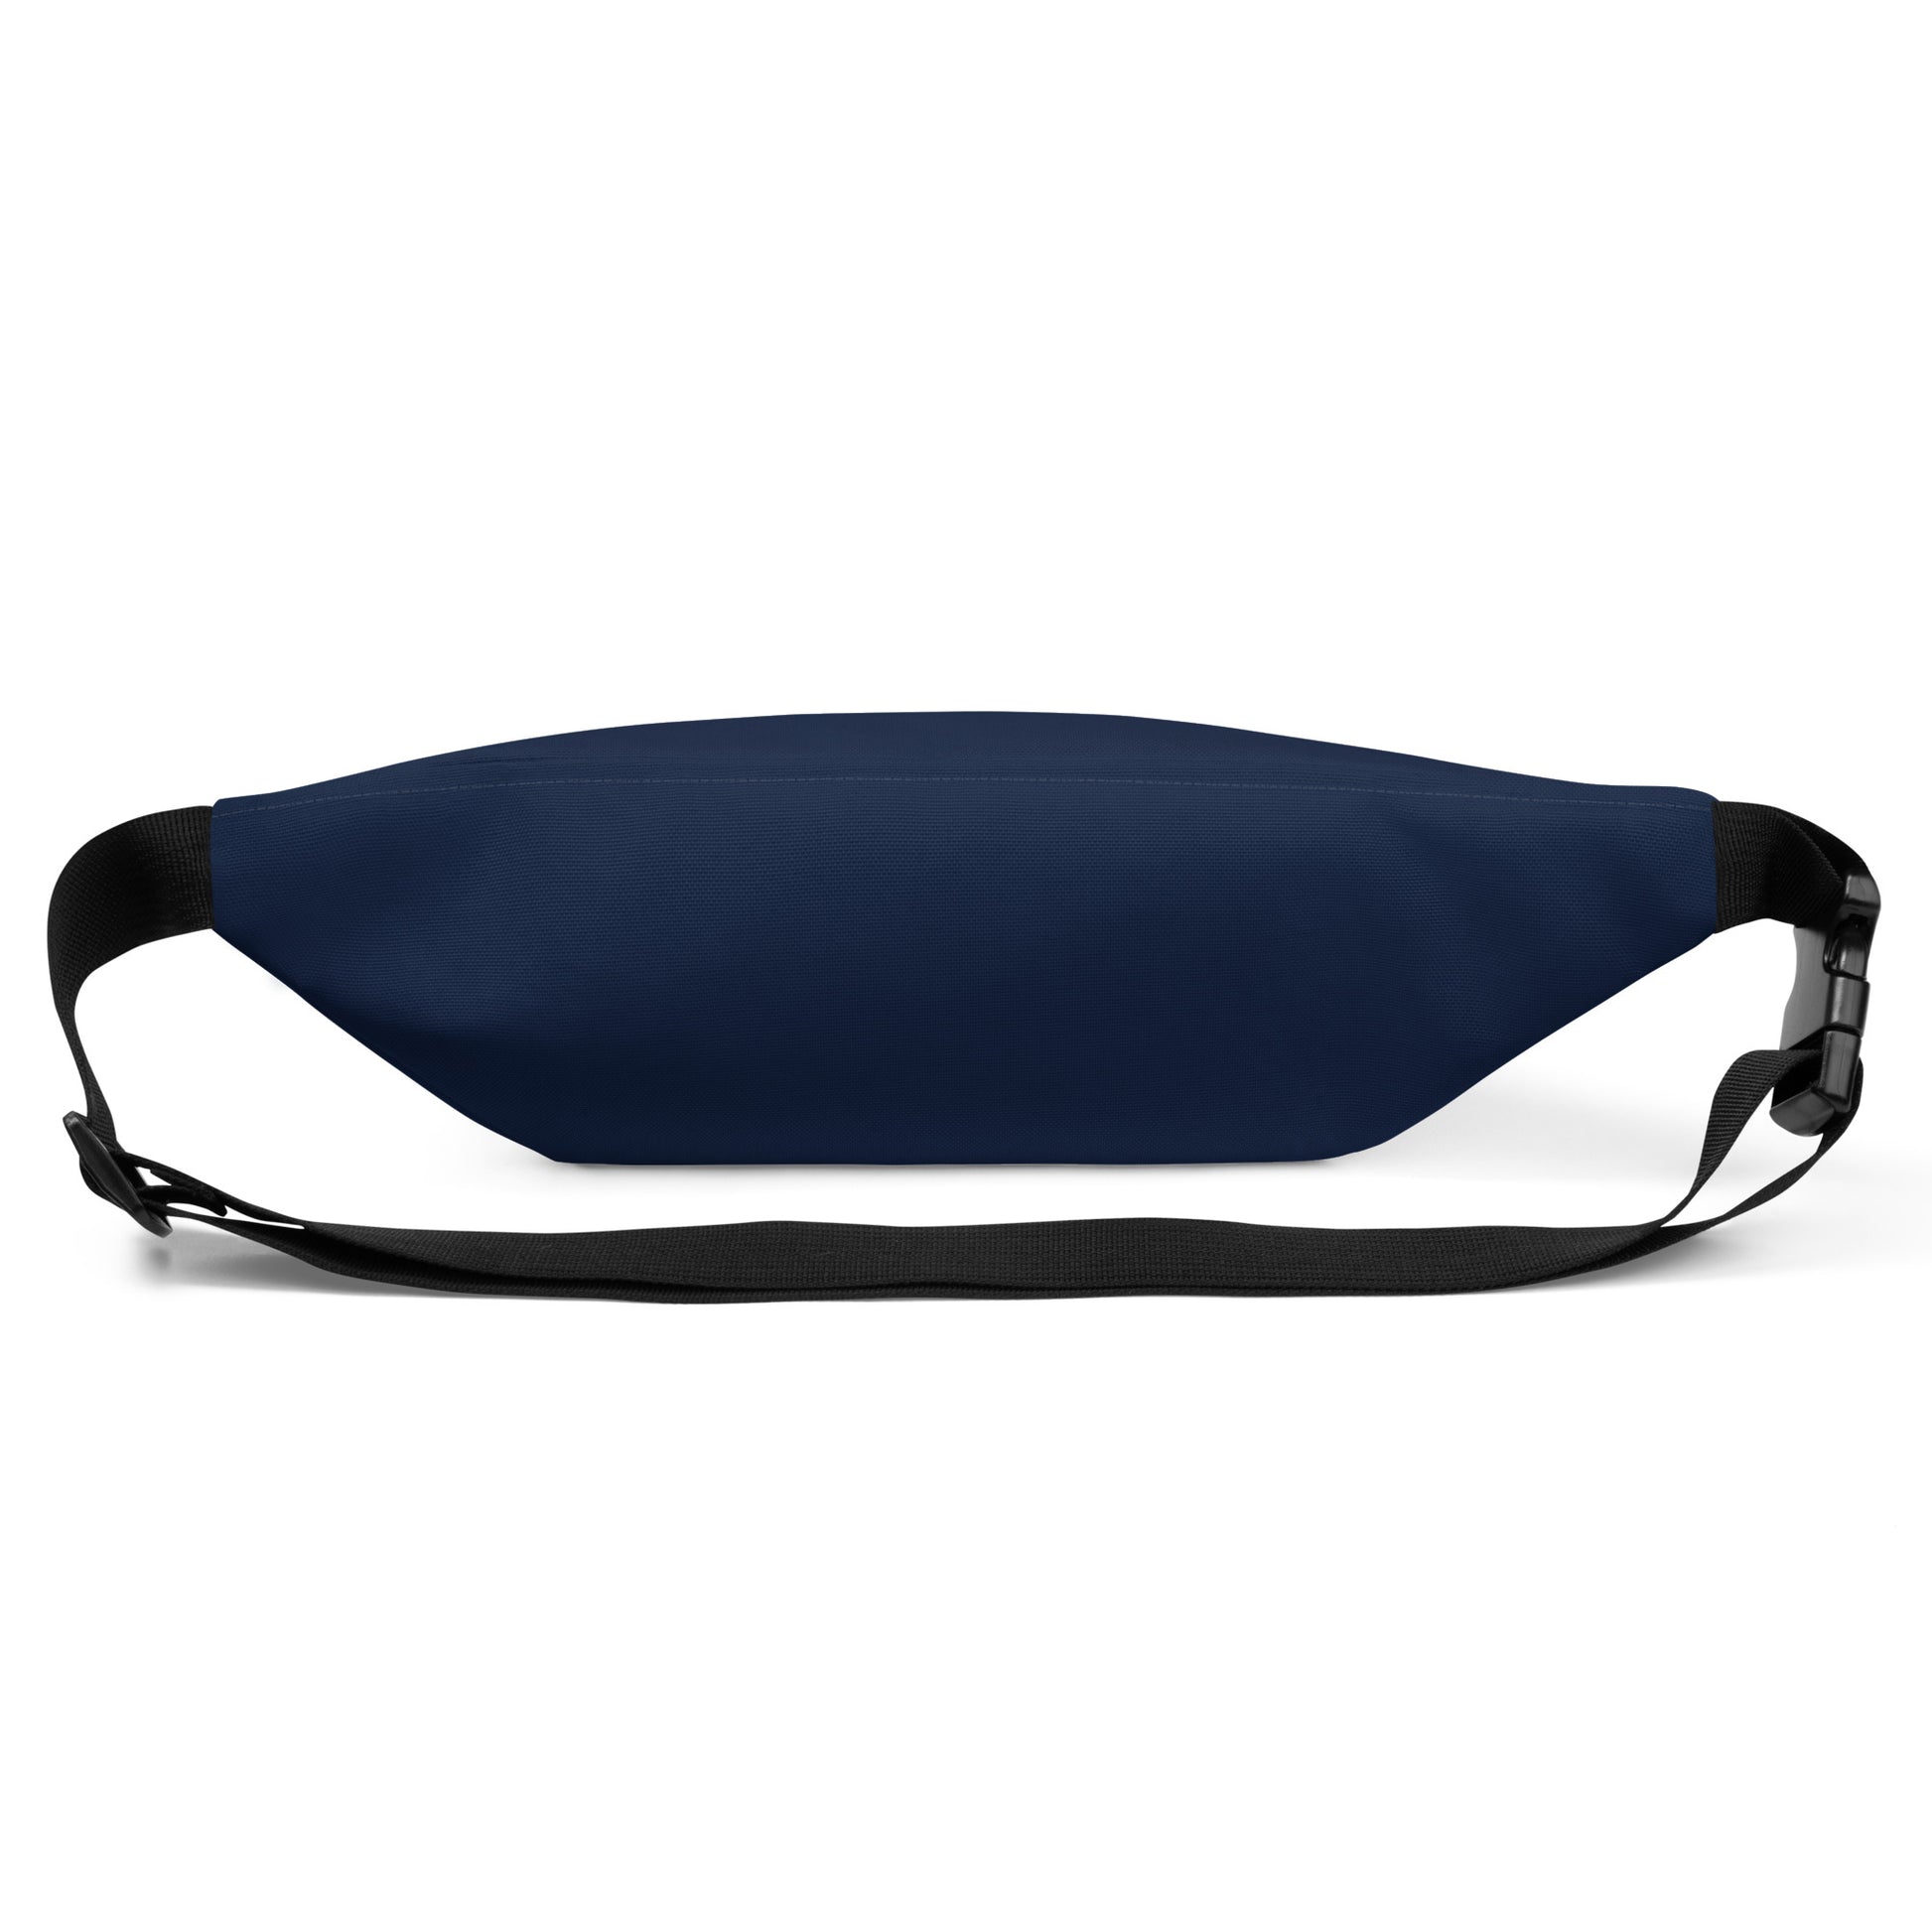 TIME OF VIBES - Fanny Pack WAVES - €39.00